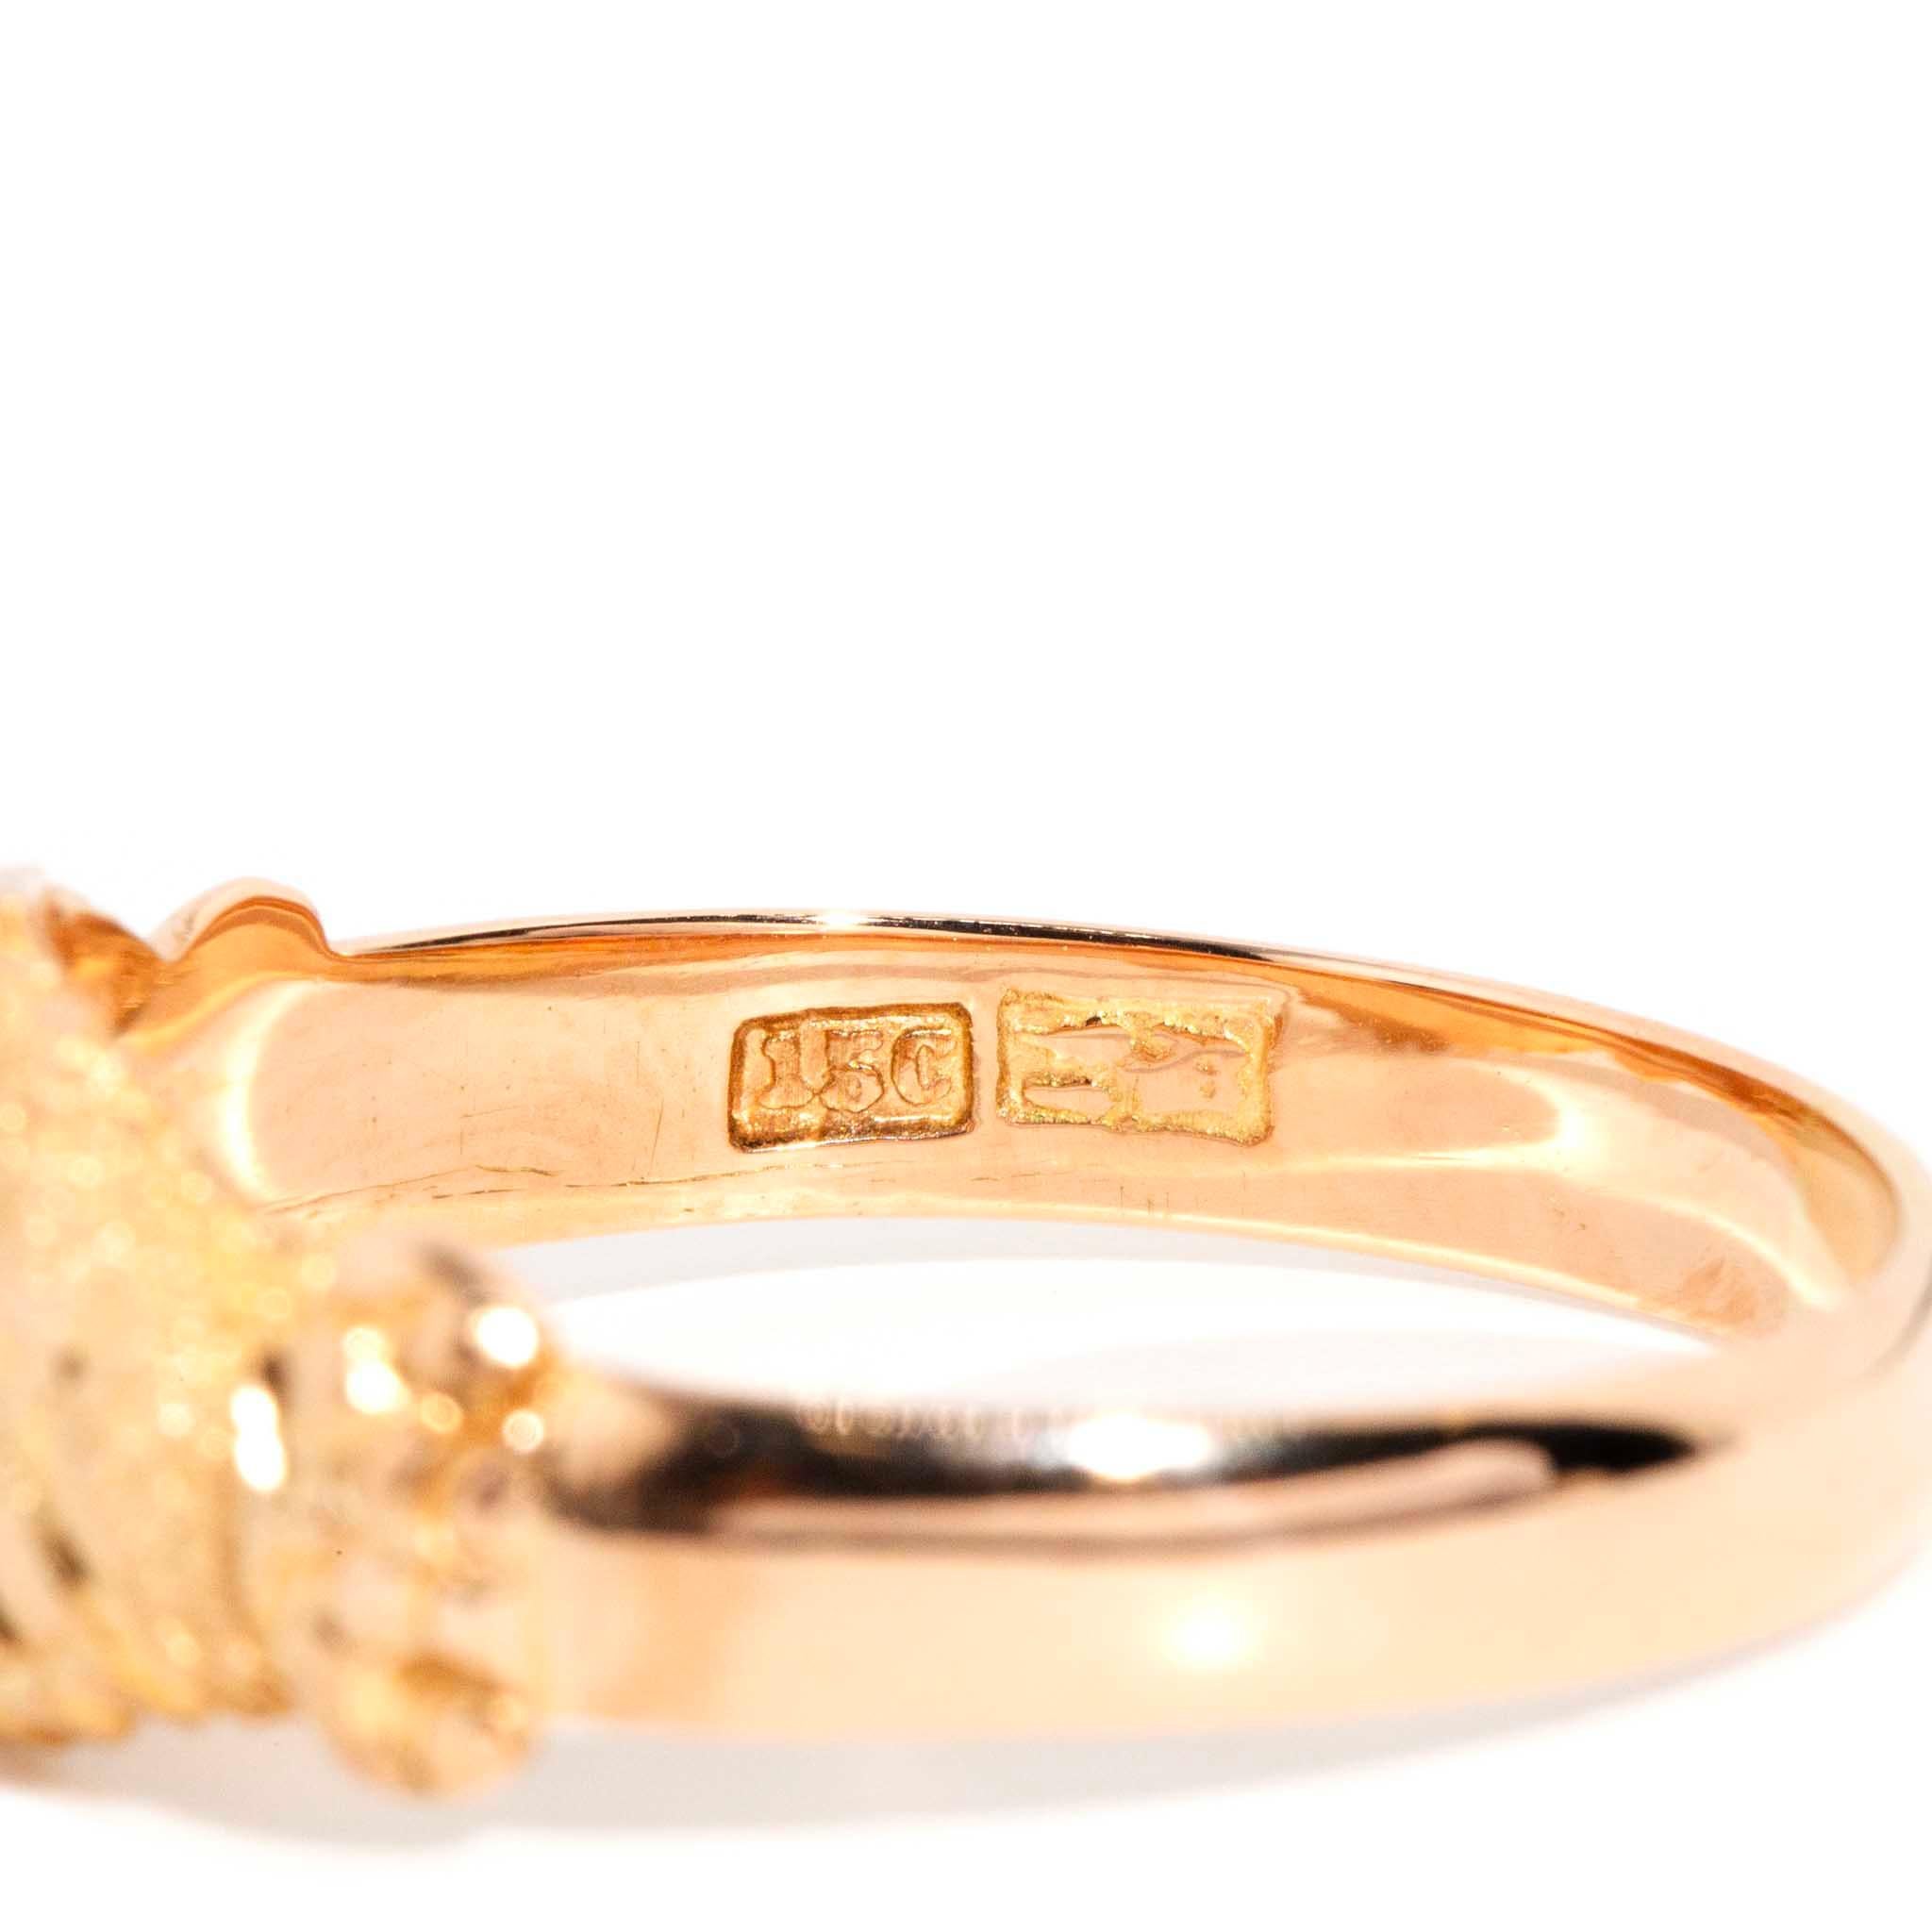 Vintage Circa 1930s Textured Fede Loyalty Ring 15 Carat Yellow Gold For Sale 5